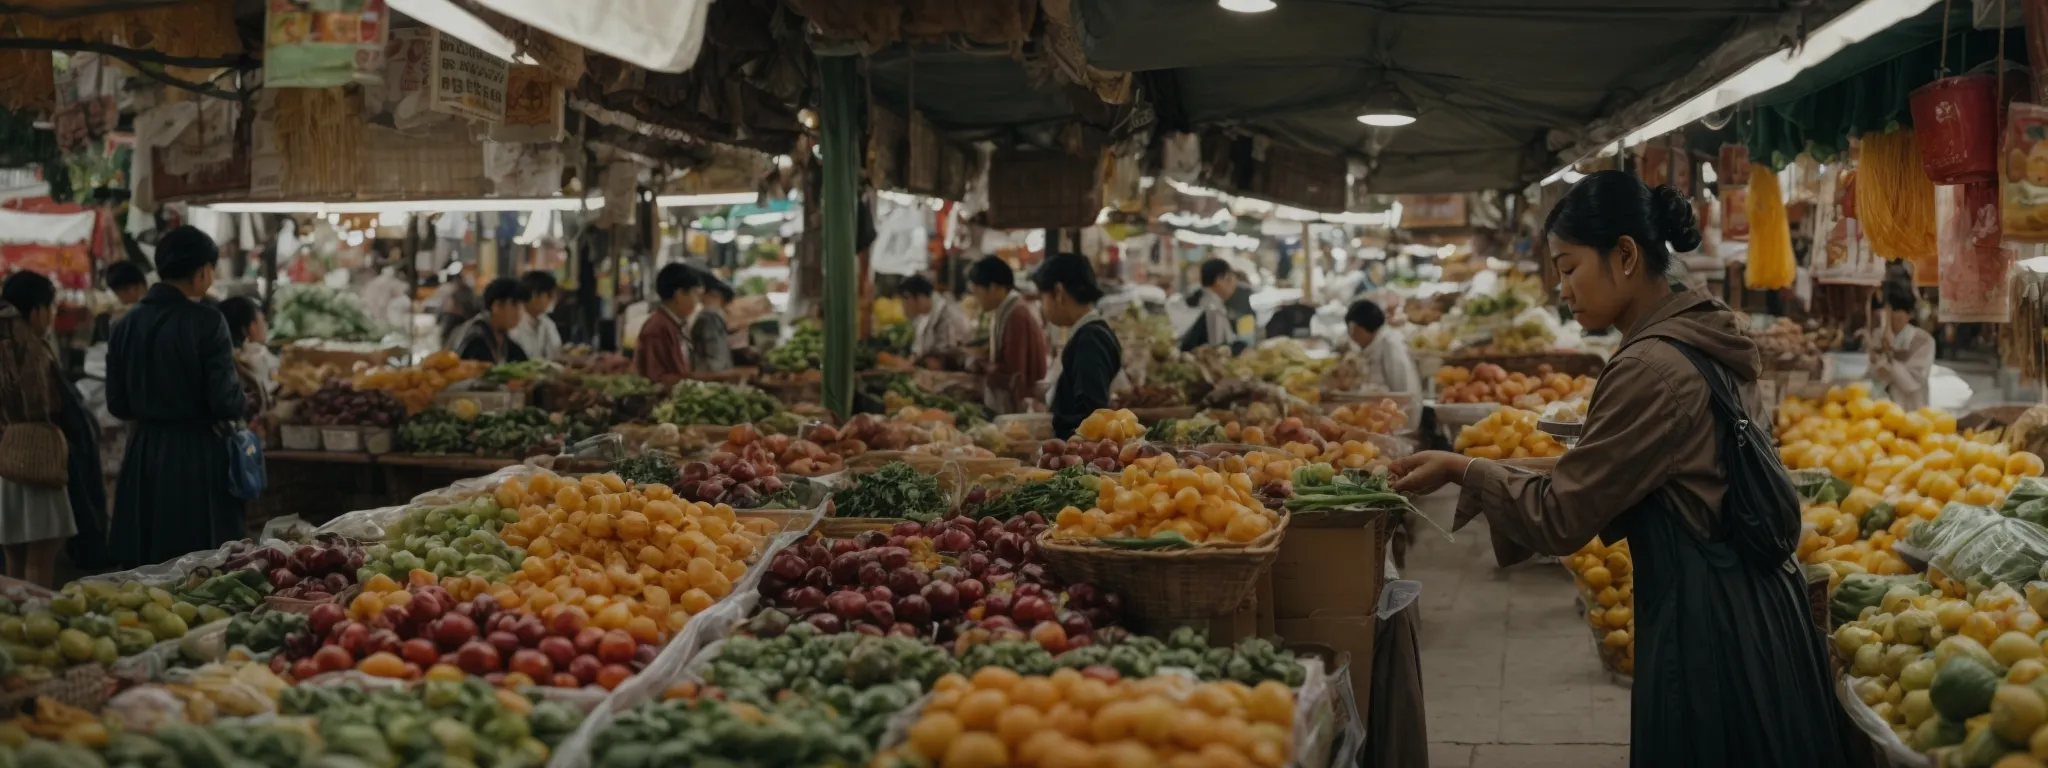 a researcher observes a local market scene to understand consumer purchasing behaviors.